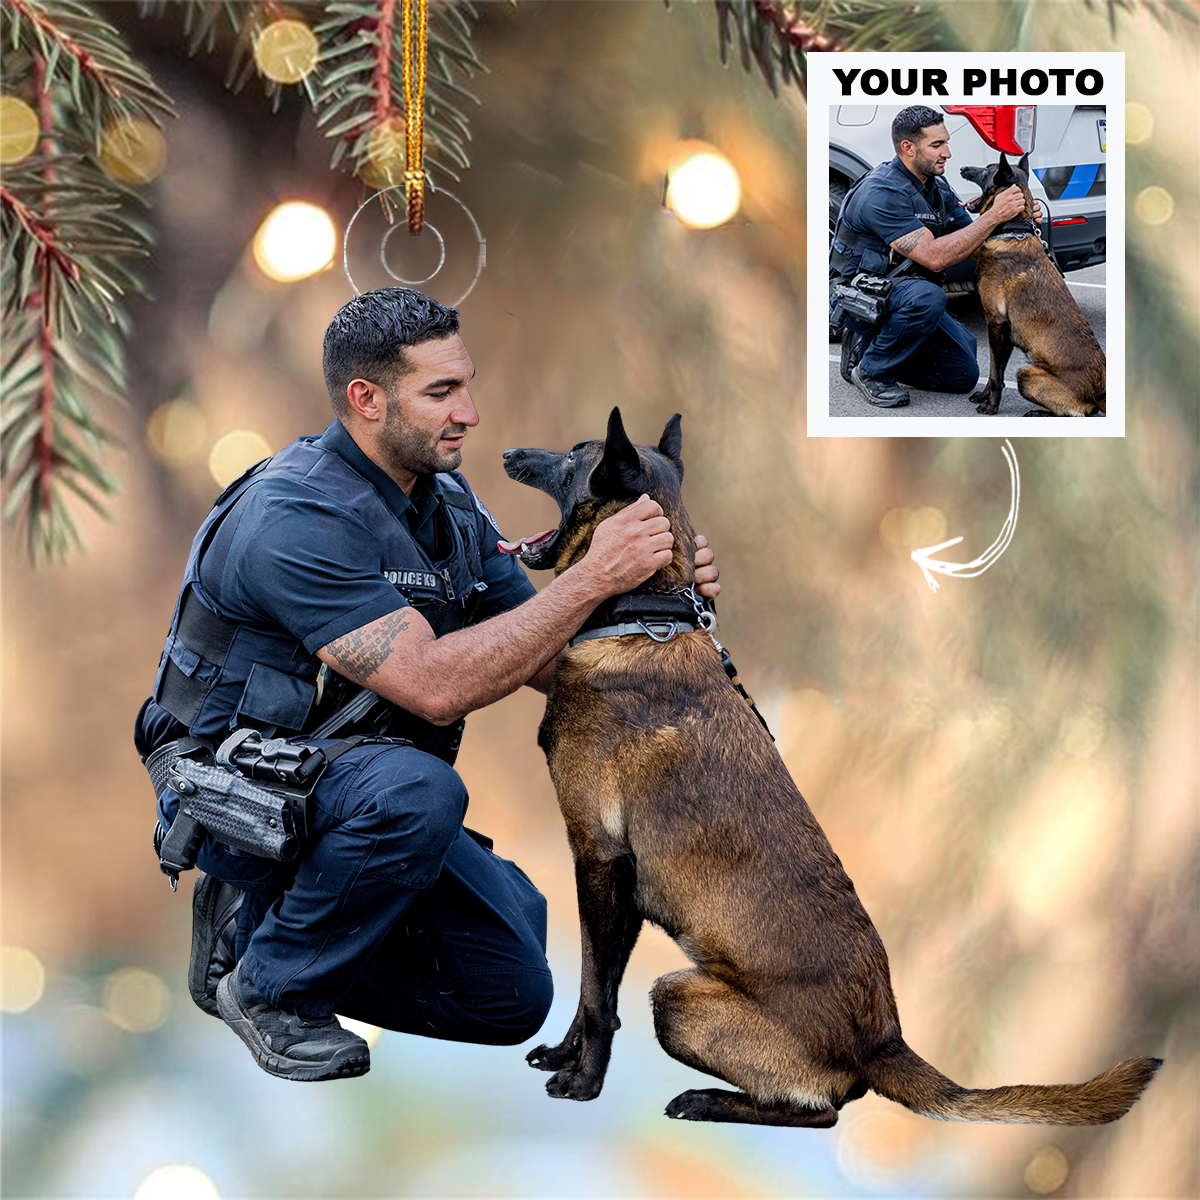 Personalized Photo Mica Ornament - Christmas, Birthday Gift For Family Members, Police Officers - Customized Your Photo Ornament